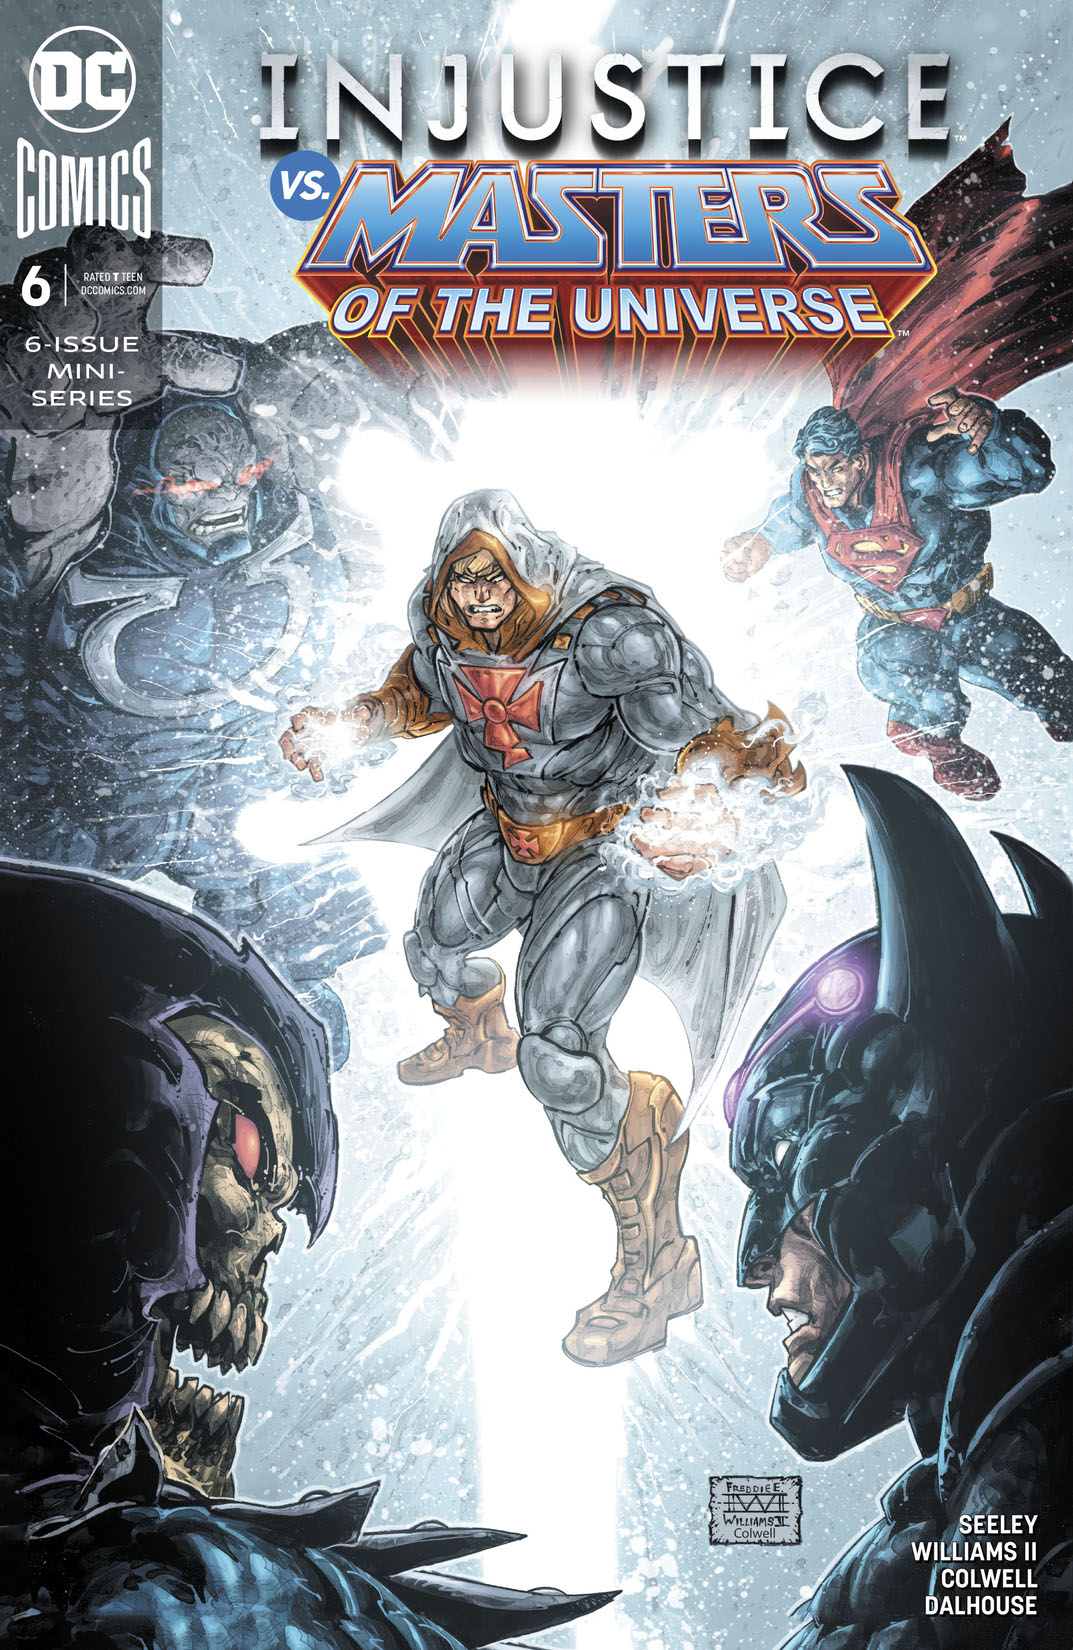 Injustice Vs. Masters of the Universe #6 preview images